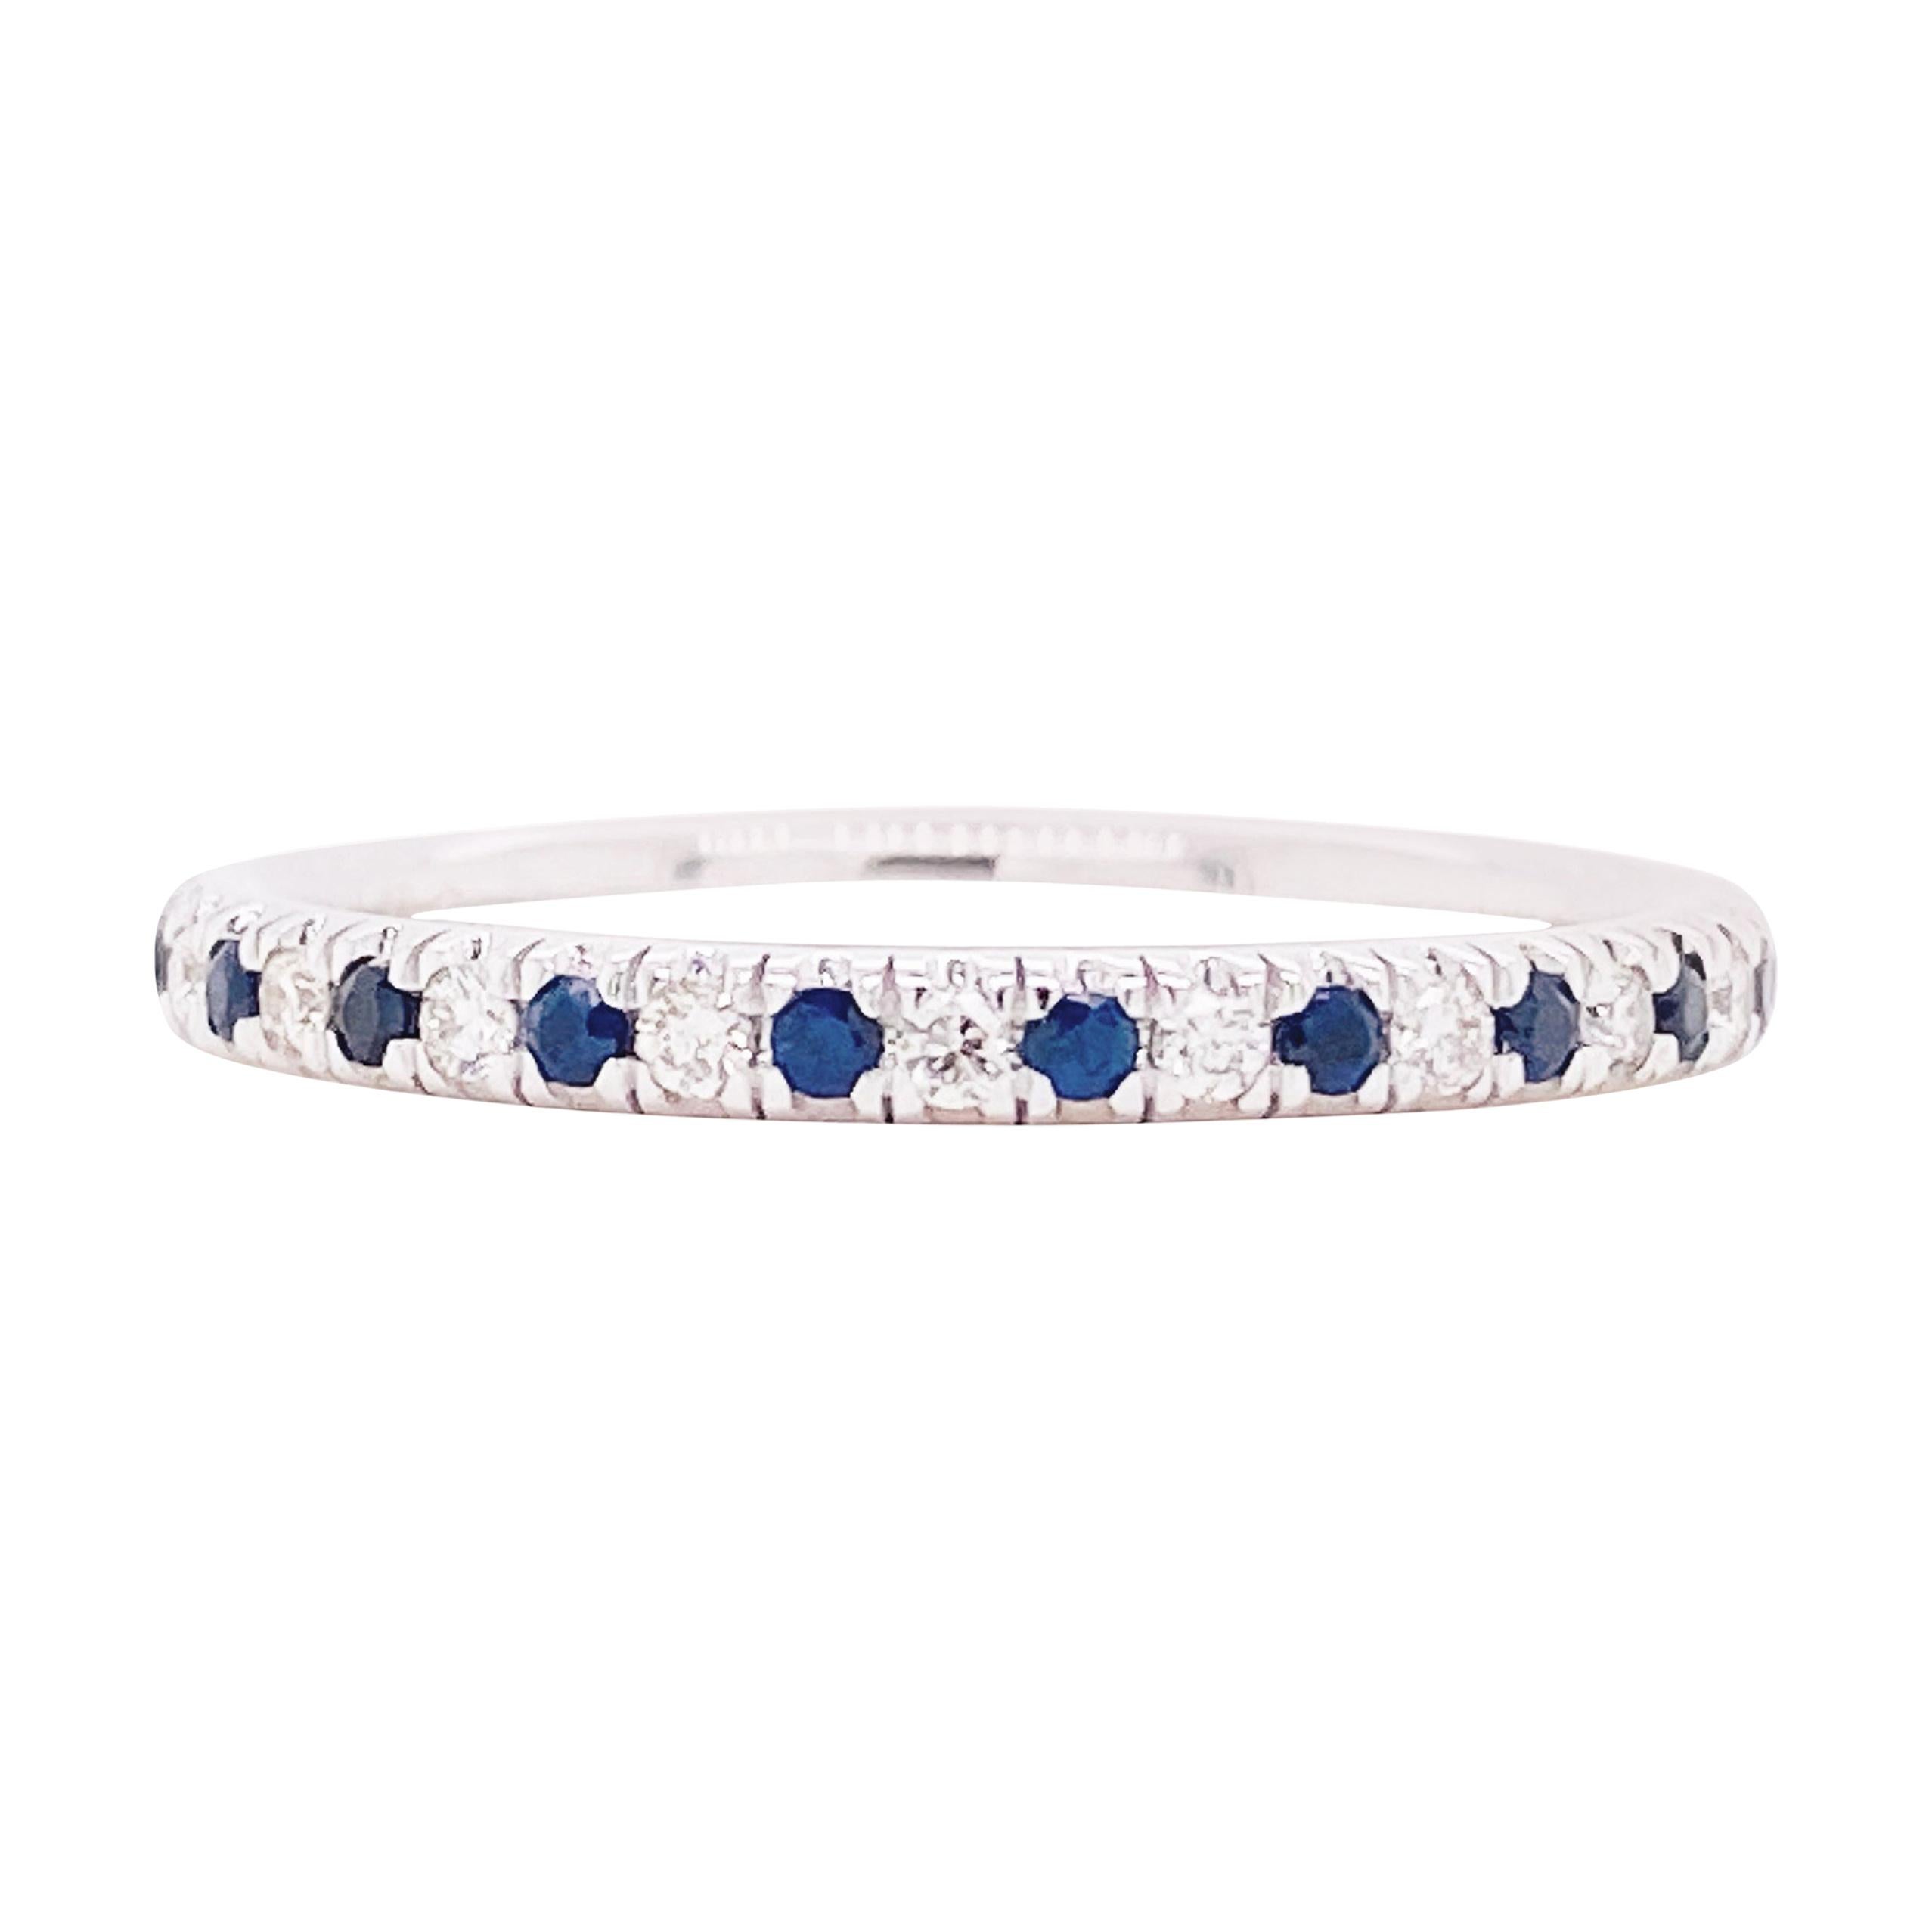 For Sale:  Sapphire Diamond Ring, Blue Sapphire, 14 Kt White Gold, Stackable Band, Classic